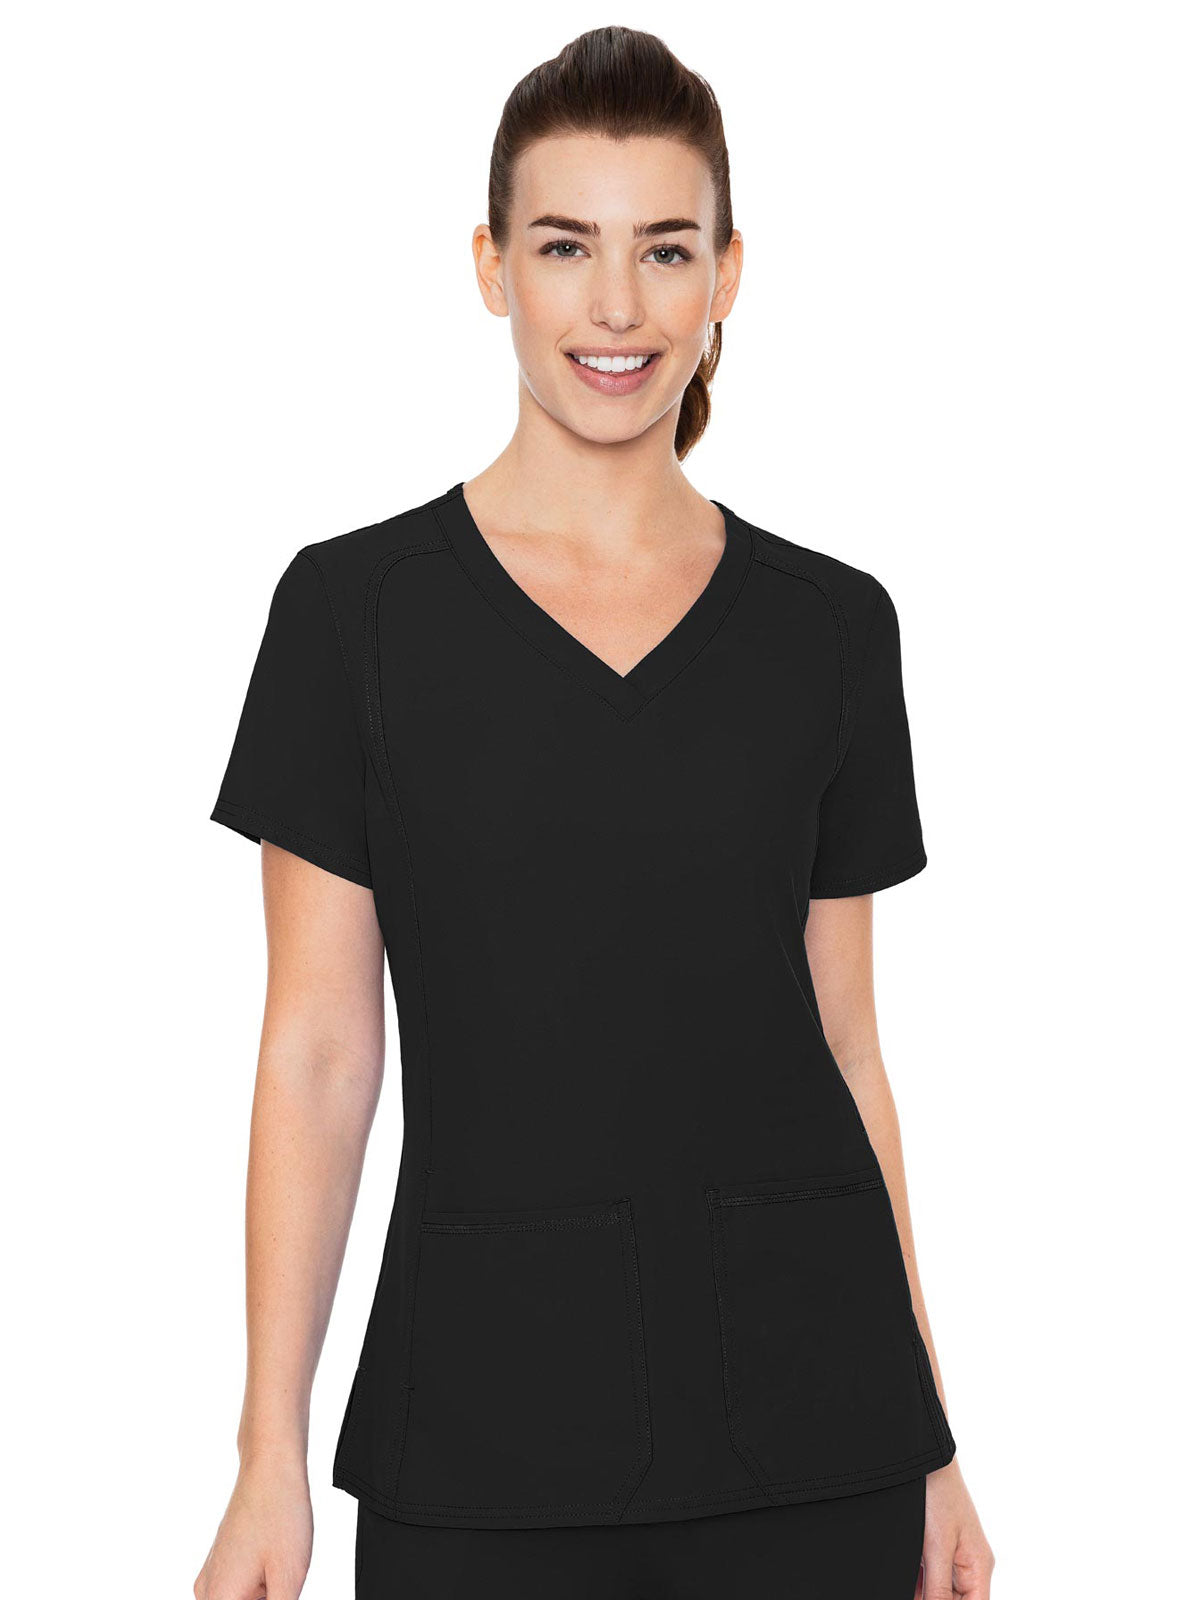 Insight - Women's Doubled Pocket Solid Scrub Top (1)